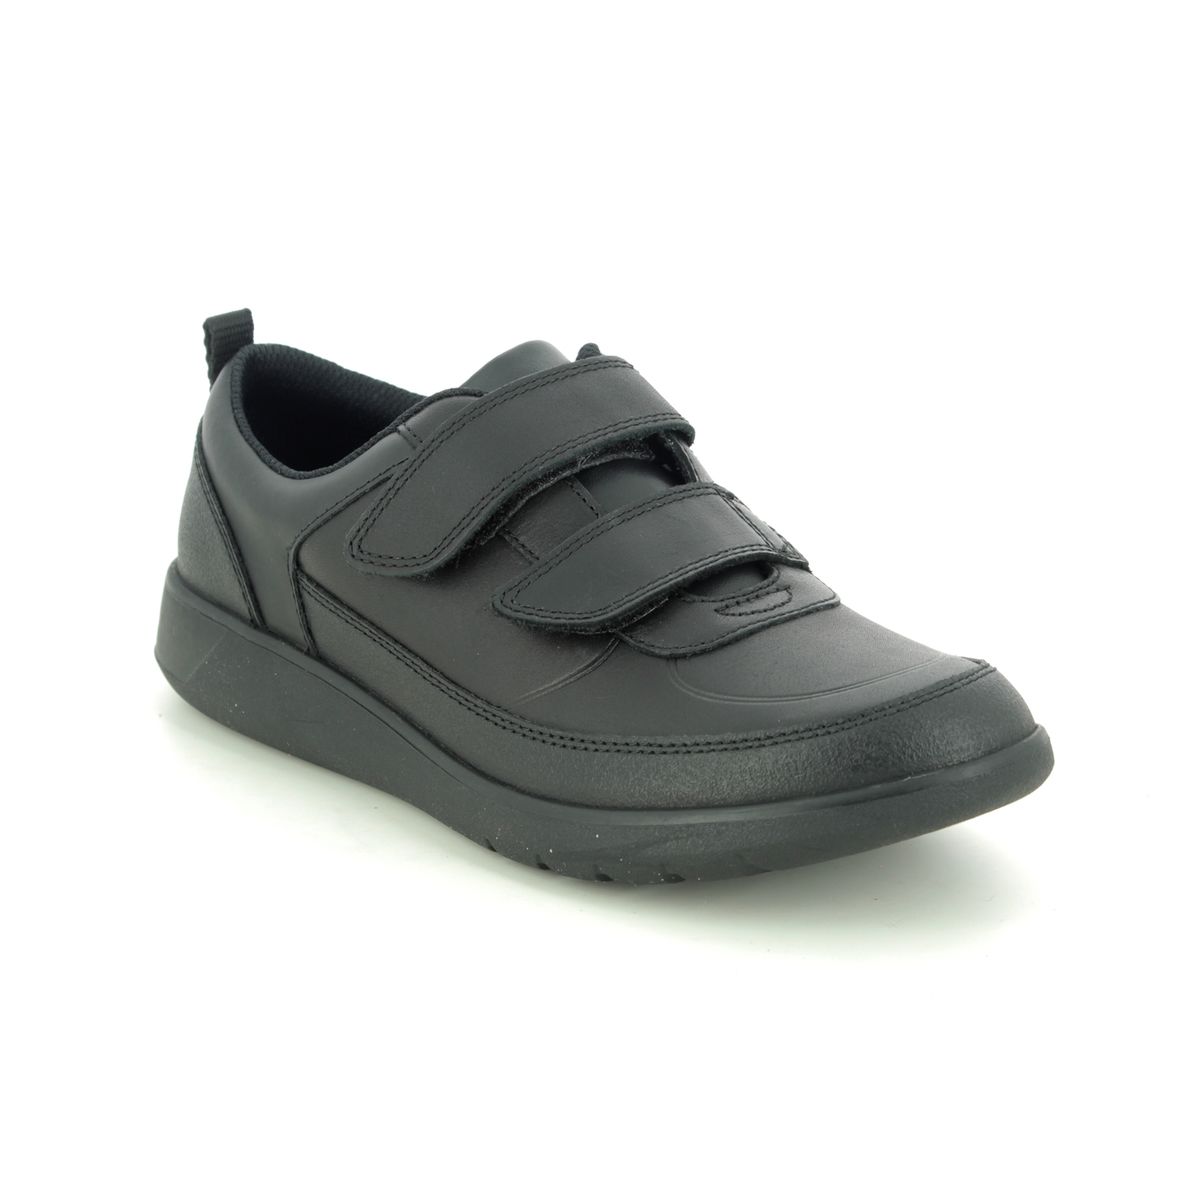 Clarks Scape Flare Y Black Leather Kids Boys Shoes 494097G In Size 5.5 In Plain Black Leather G Width Fitting For School For kids